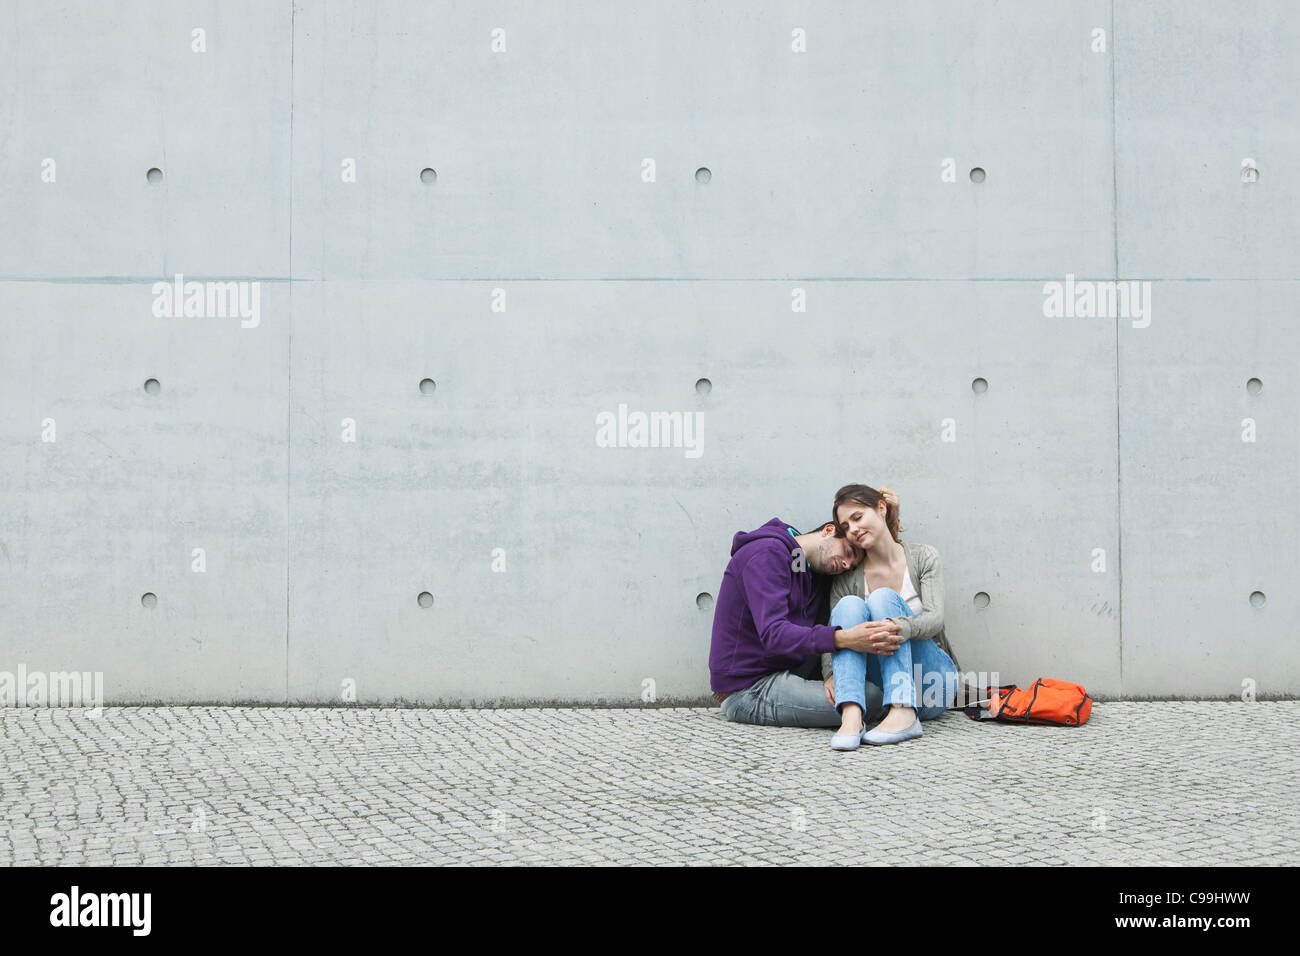 Germany, Berlin, Couple sitting in front of large wall on sidewalk Stock Photo